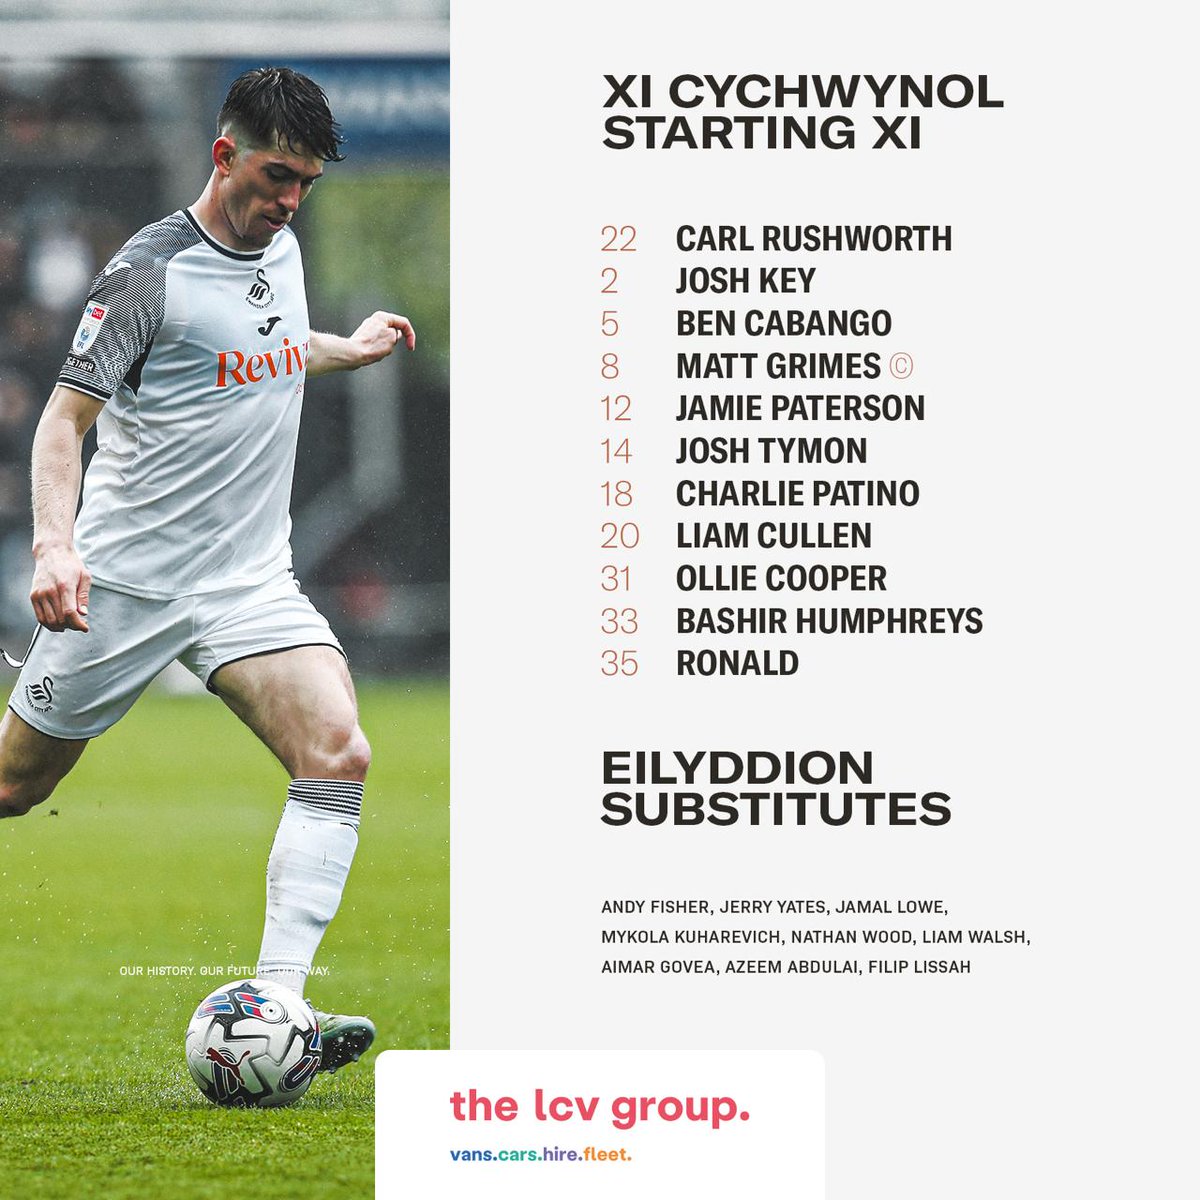 ⚠️ 𝗦𝗧𝗔𝗥𝗧𝗜𝗡𝗚 𝗫𝗜 ⚠️ Here's how the #Swans line up for the final @SkyBetChamp fixture of the campaign 🆚 @MillwallFC. Brought to you in partnership with @the_lcvgroup.